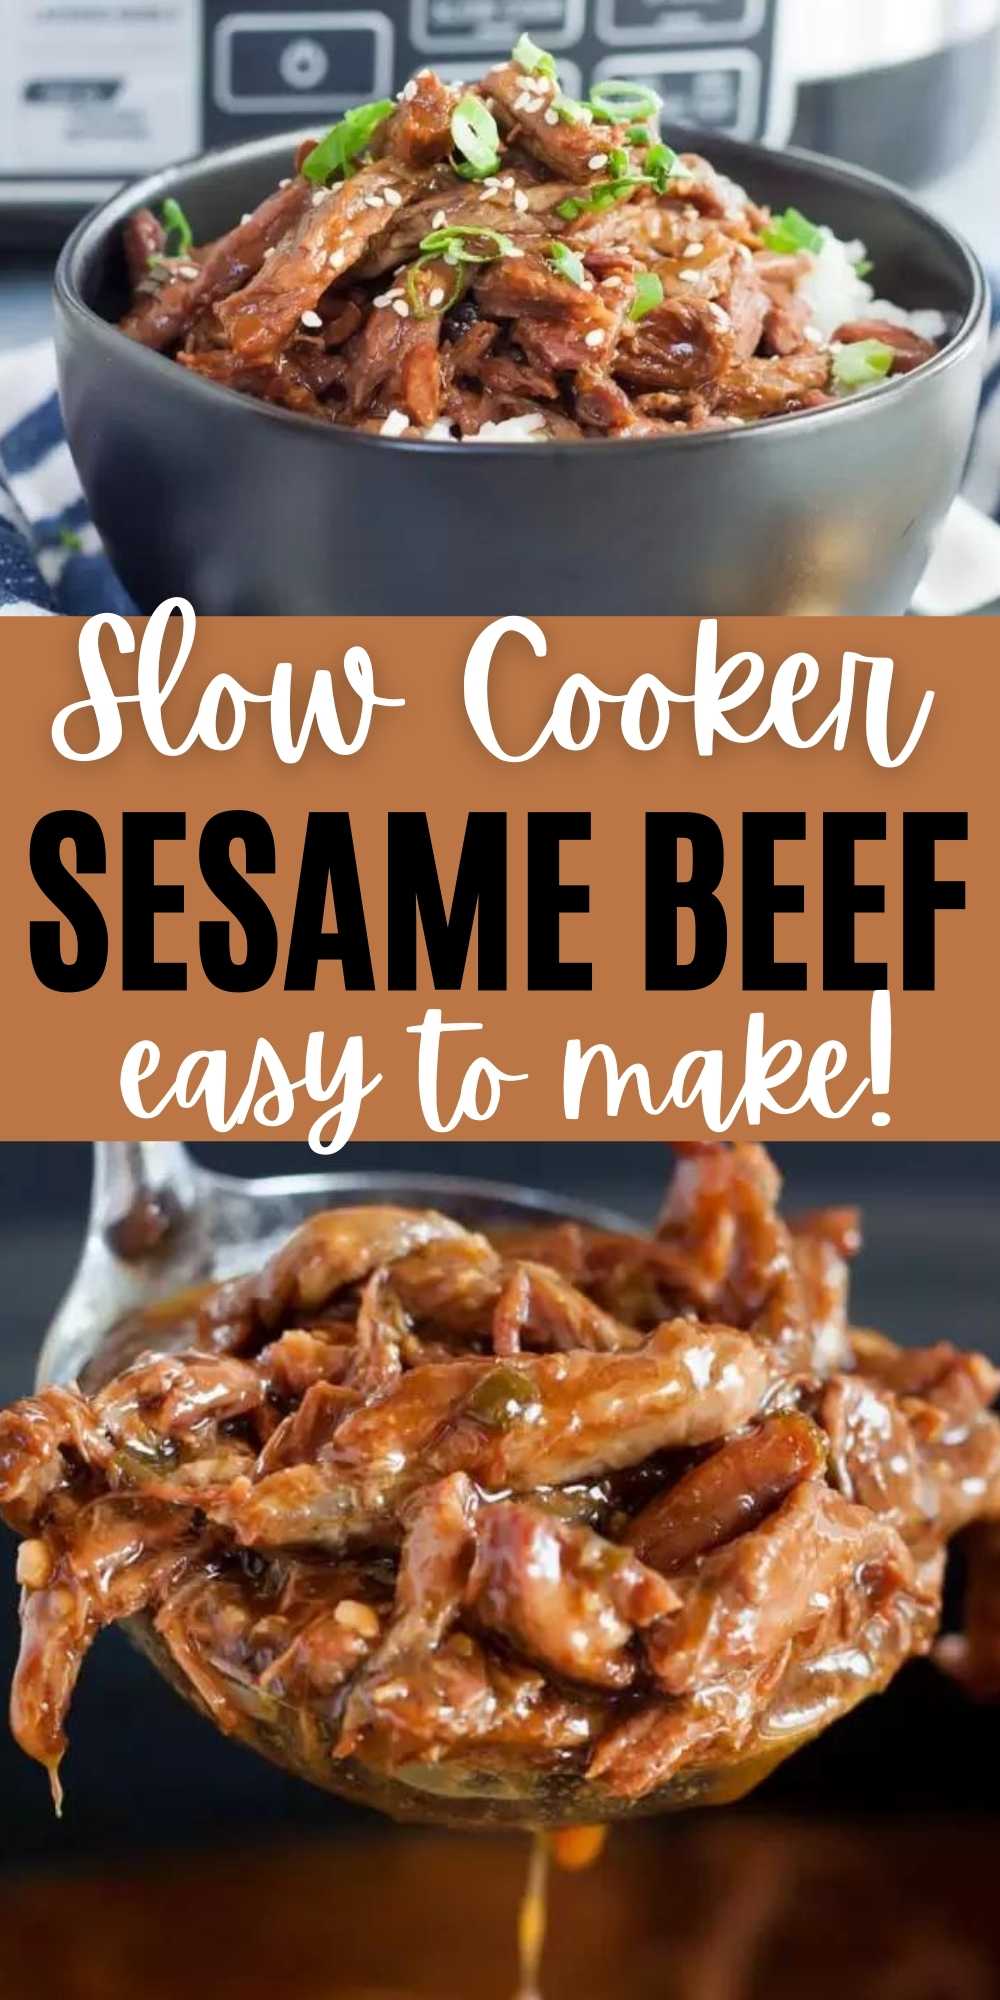 You are going to love this Crock pot Sesame Beef recipe. It is so easy to make and the beef comes out so tender and flavorful in a slow cooker.  Everyone will love this easy to make sesame beef recipe.  #eatingonadime #asianrecipes #crockpotrecipes #beefrecipes 
